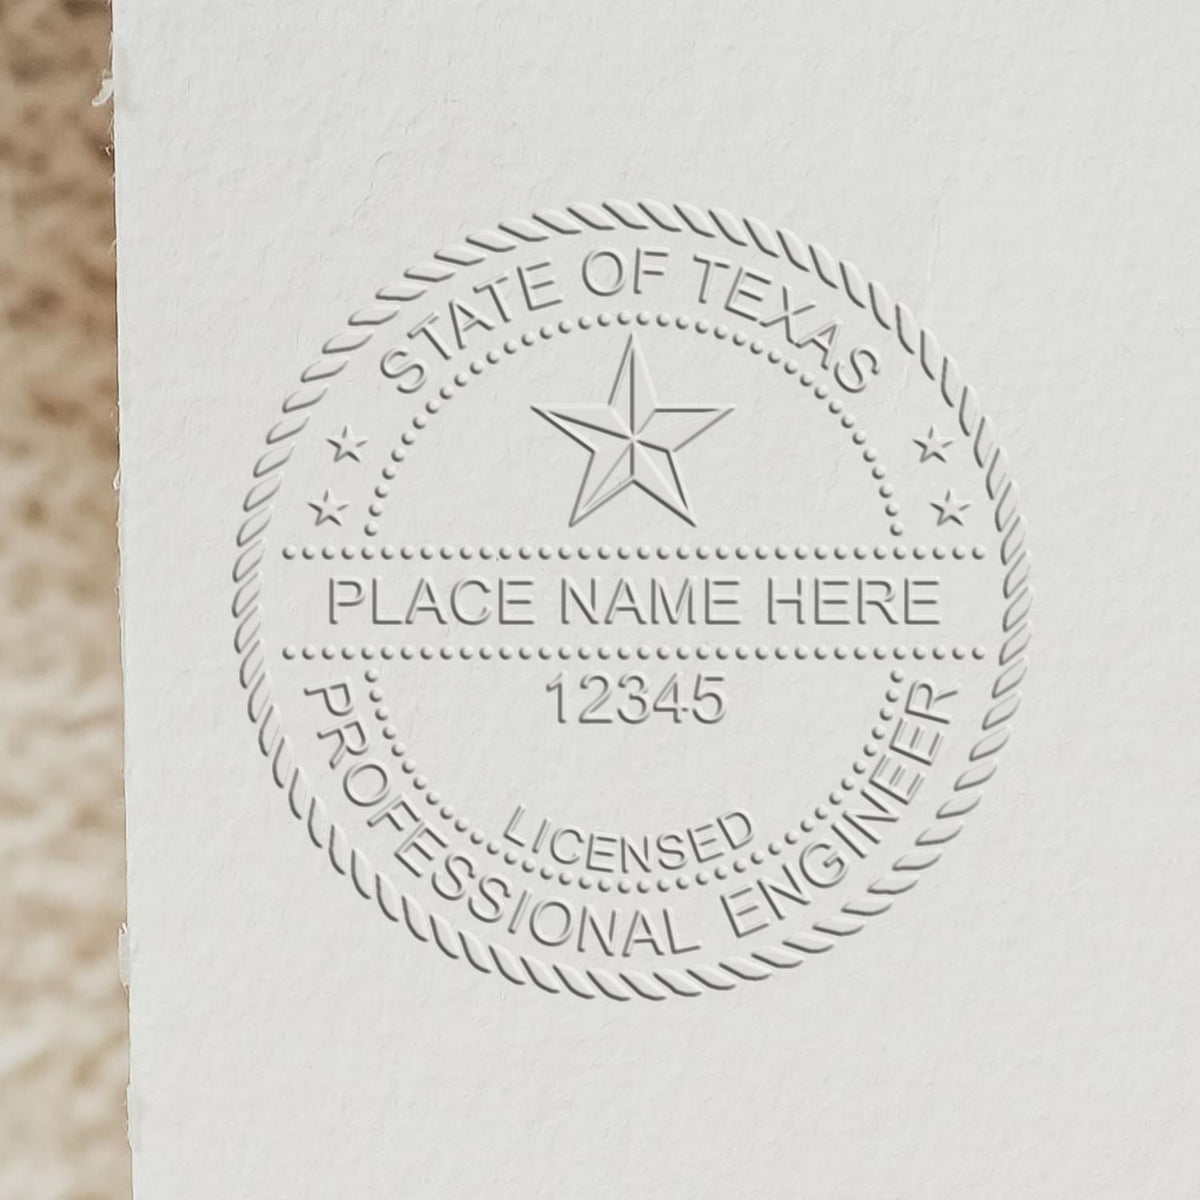 A stamped impression of the Long Reach Texas PE Seal in this stylish lifestyle photo, setting the tone for a unique and personalized product.